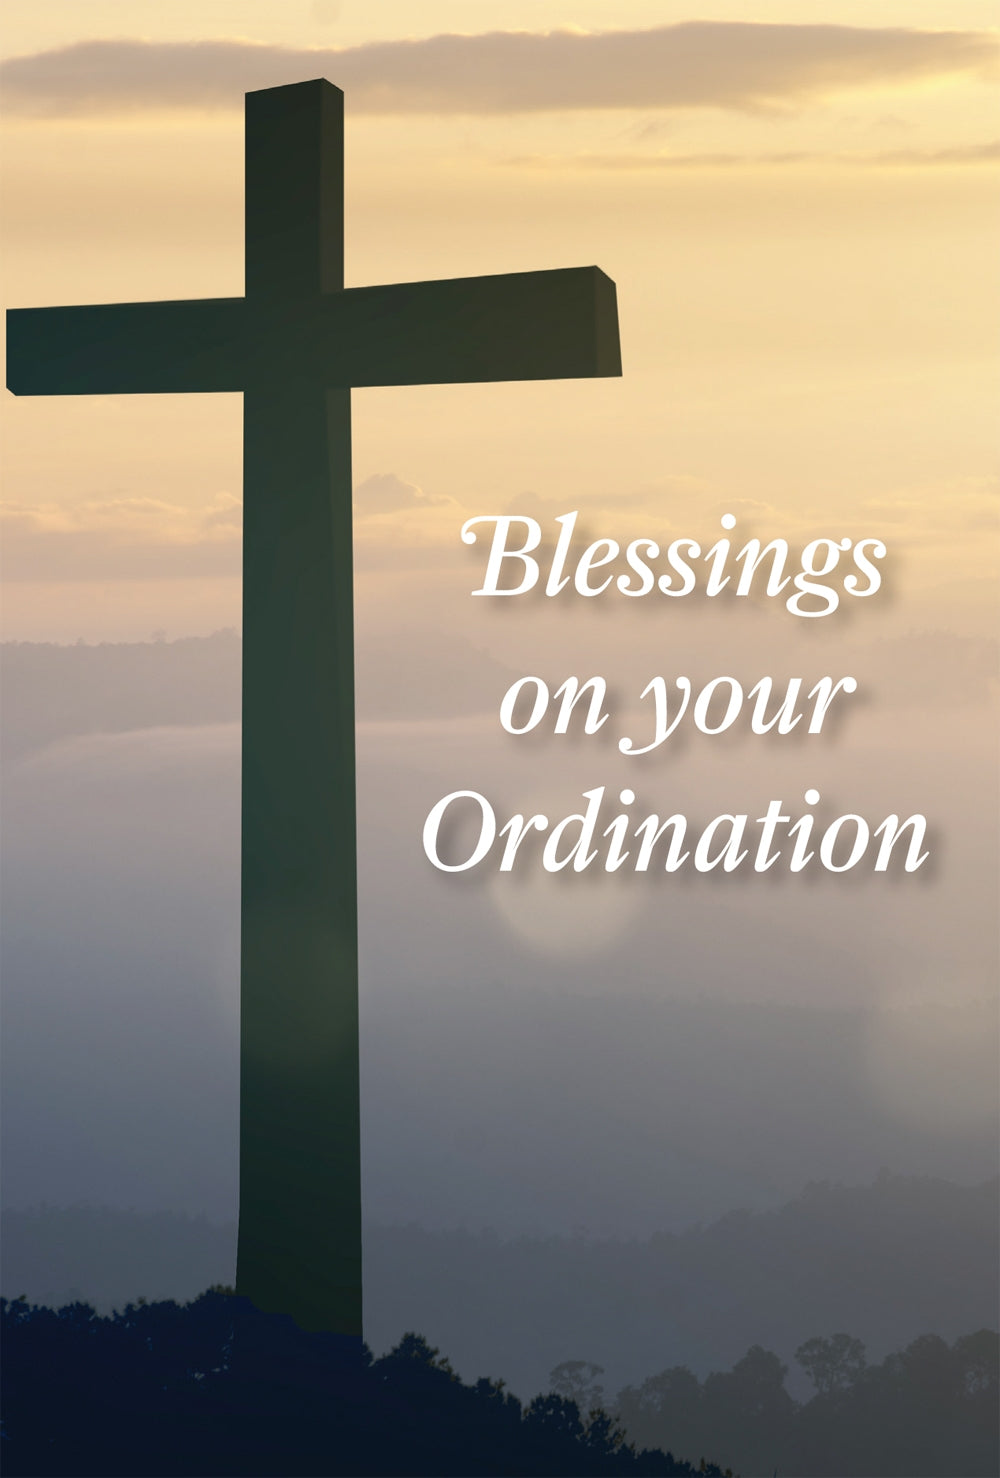 On Your Ordination - Cross Std Card Gloss (6 Pack)On Your Ordination - Cross Std Card Gloss (6 Pack)